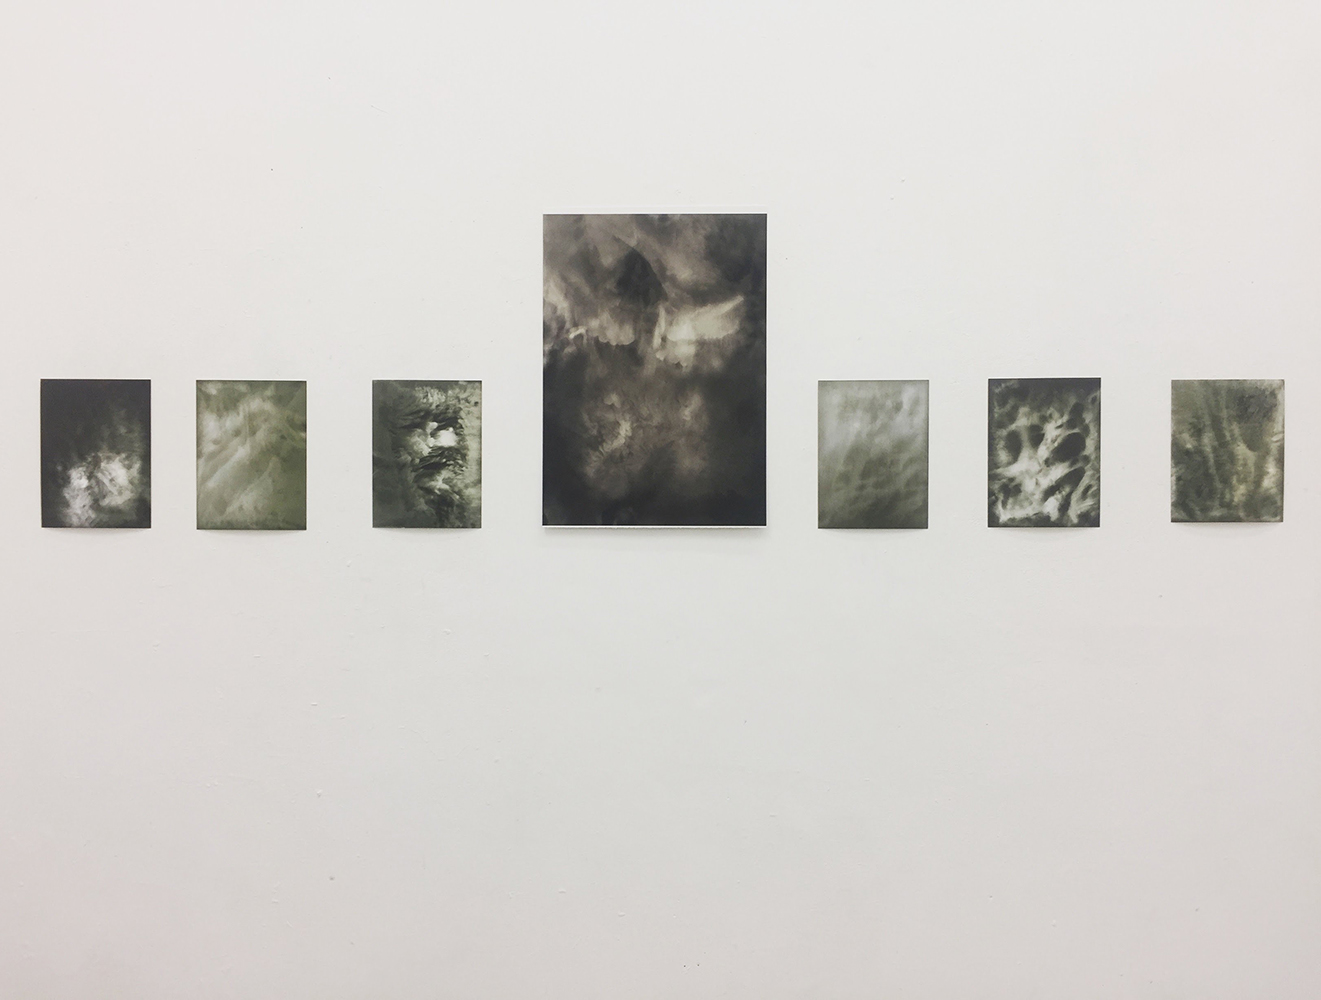 Photograph of a gallery wall with 7 black and white images on it.